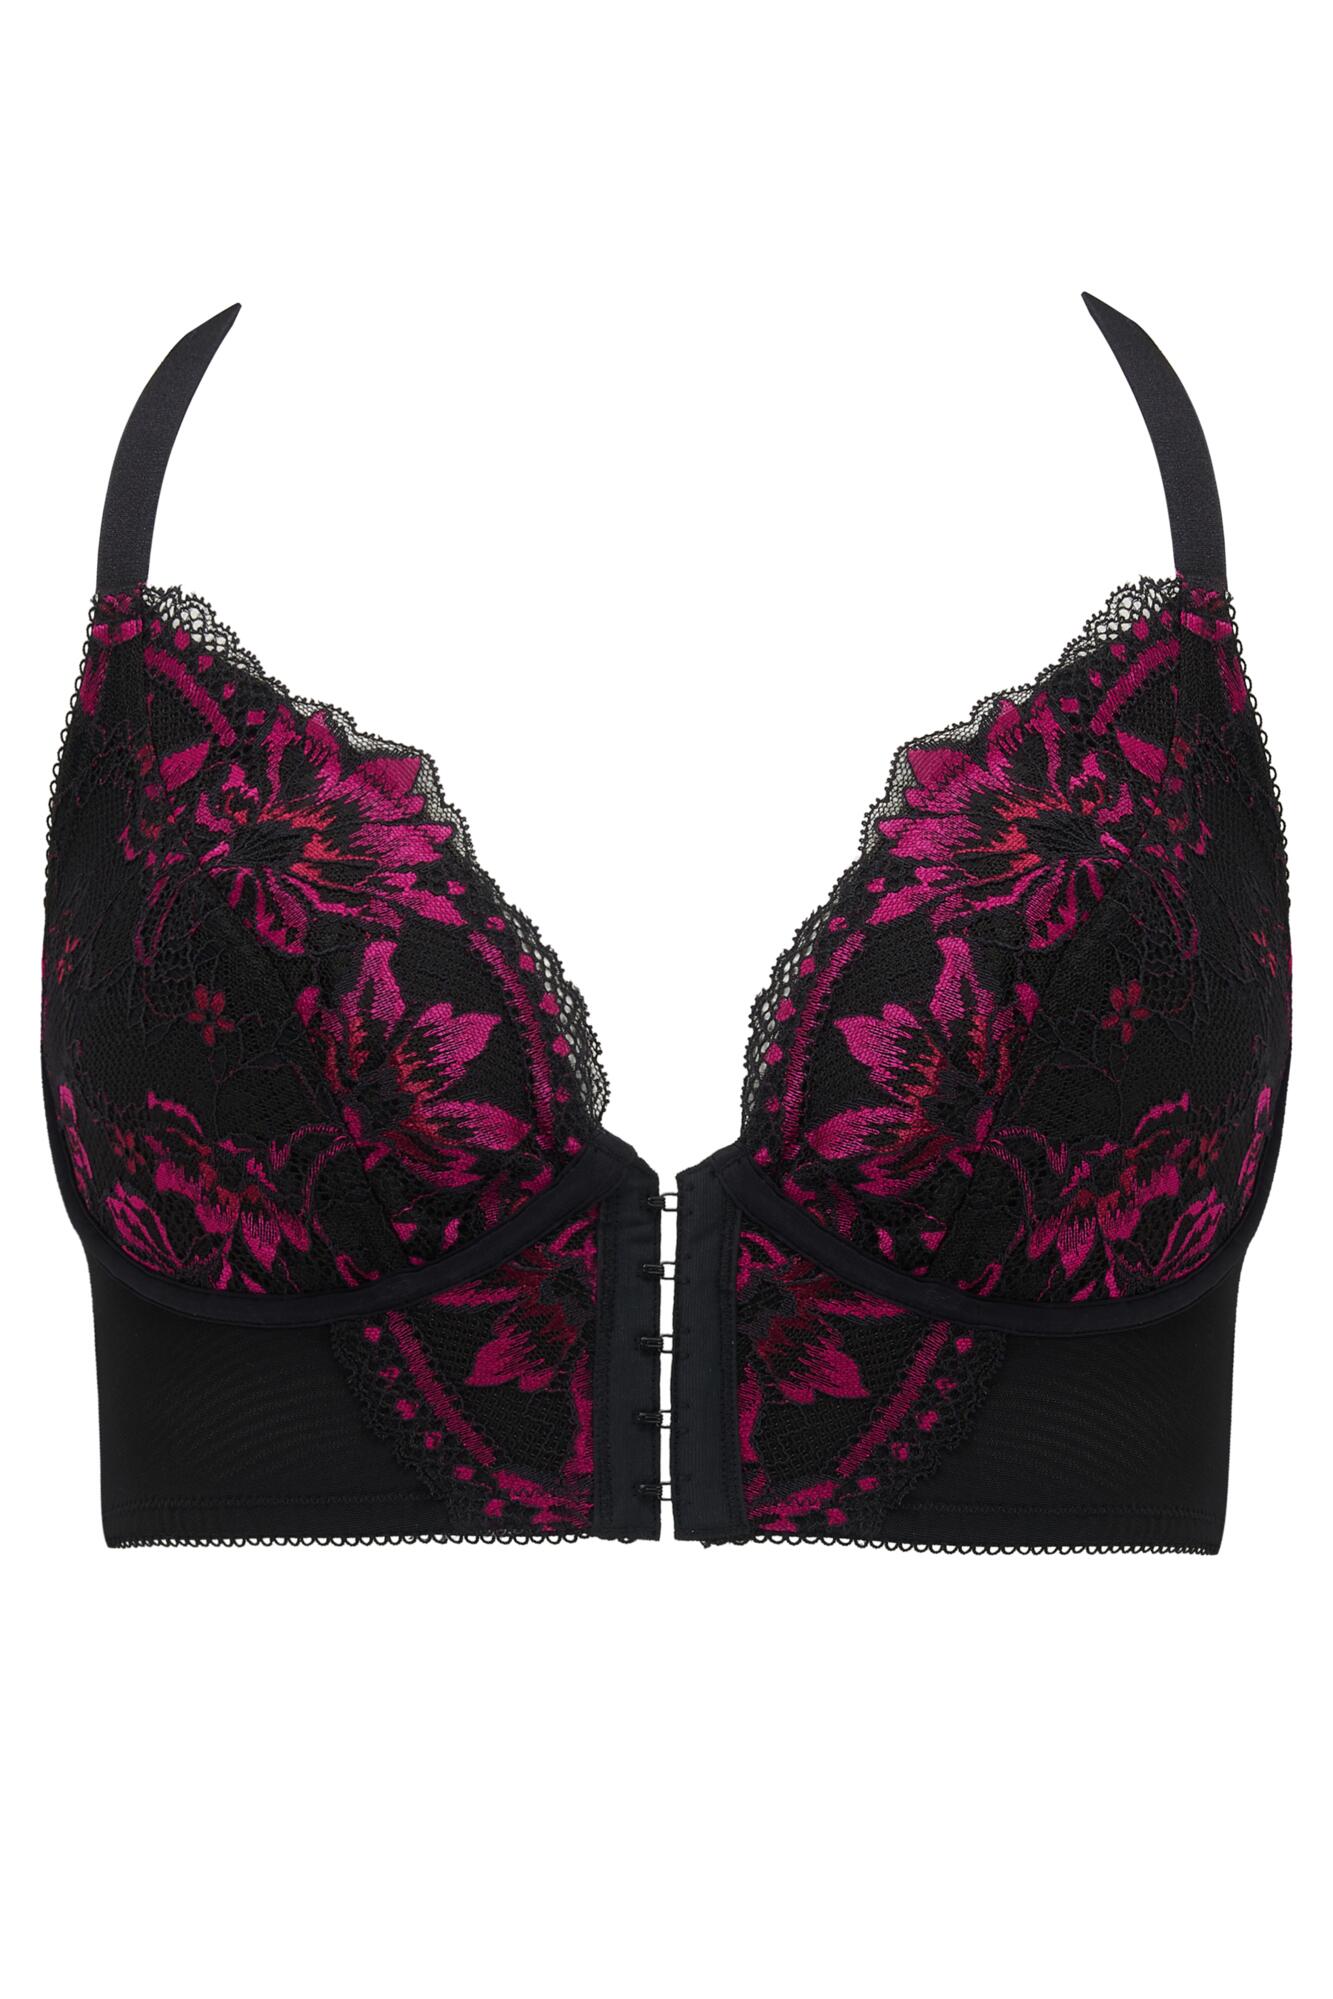 J'Adore Front Fastening Bralette in Black/Pink | Pour Moi Clothing